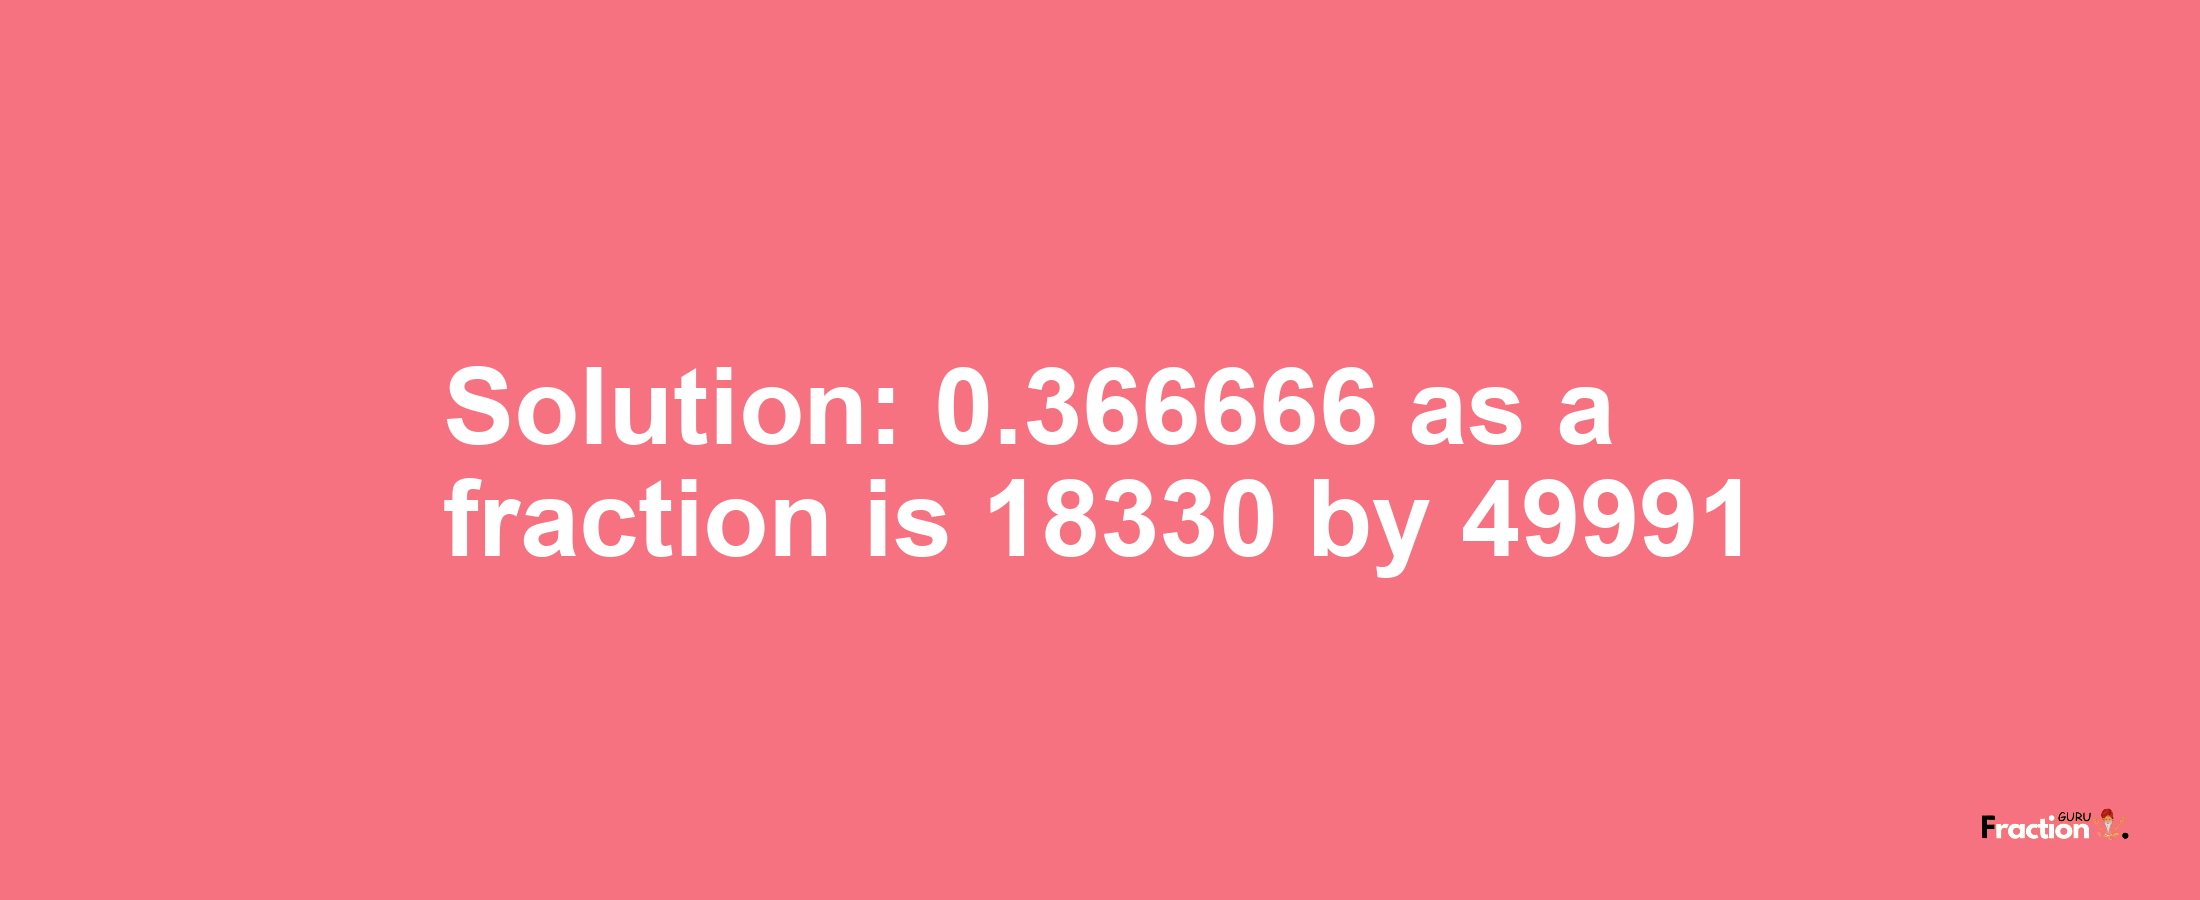 Solution:0.366666 as a fraction is 18330/49991